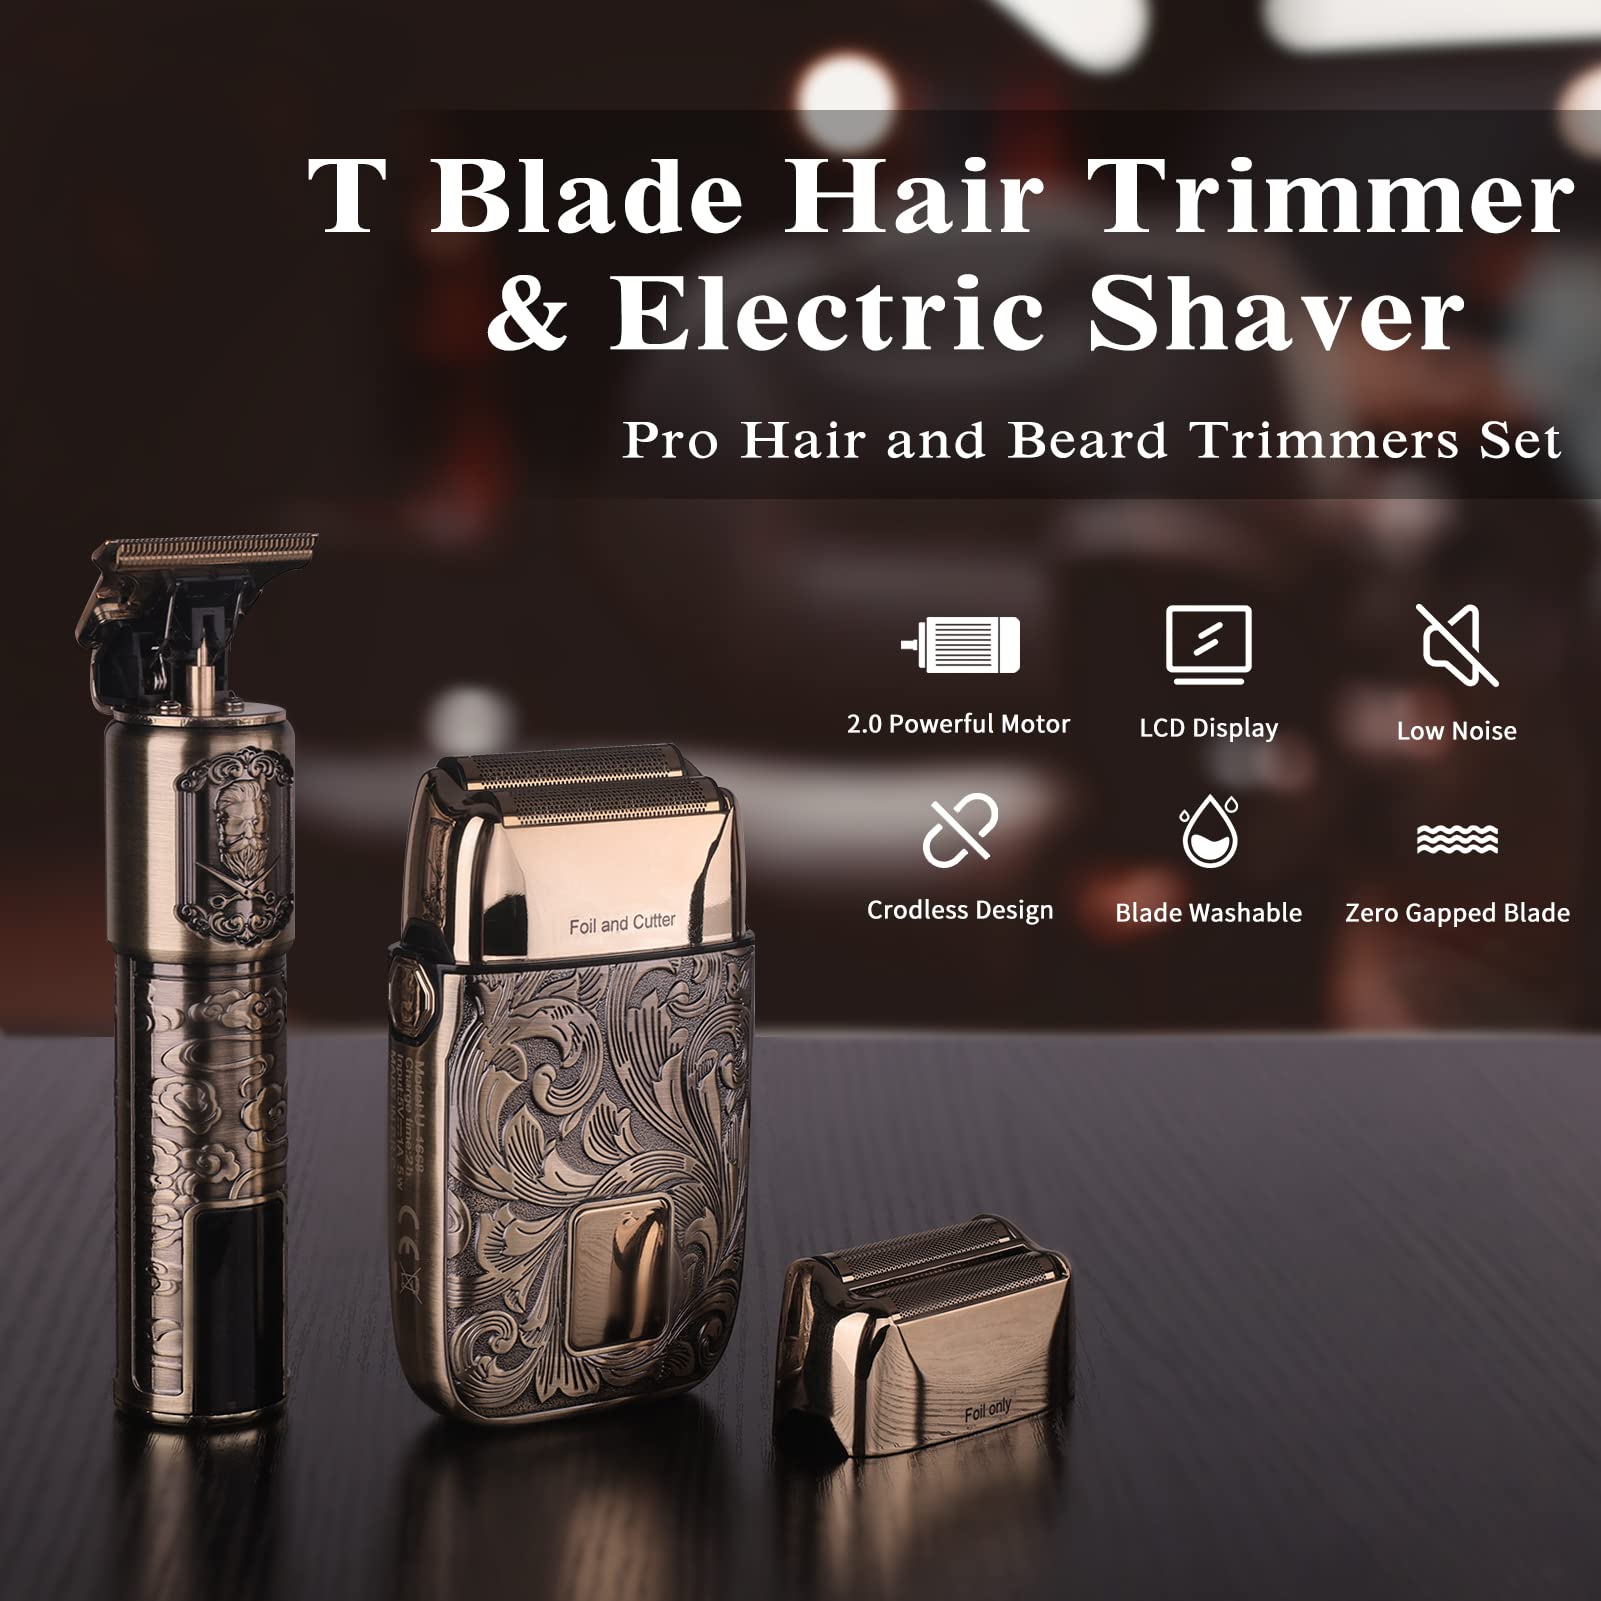 Ufree Electric Razor Shavers for Men, Beard Trimmer Hair Trimmer Shaving Kit, Electric Shavers Barber Clippers for Men, Birthday Gifts for Him, Mens Grooming Kit with 4 Guards 2 Foil Shaver Head